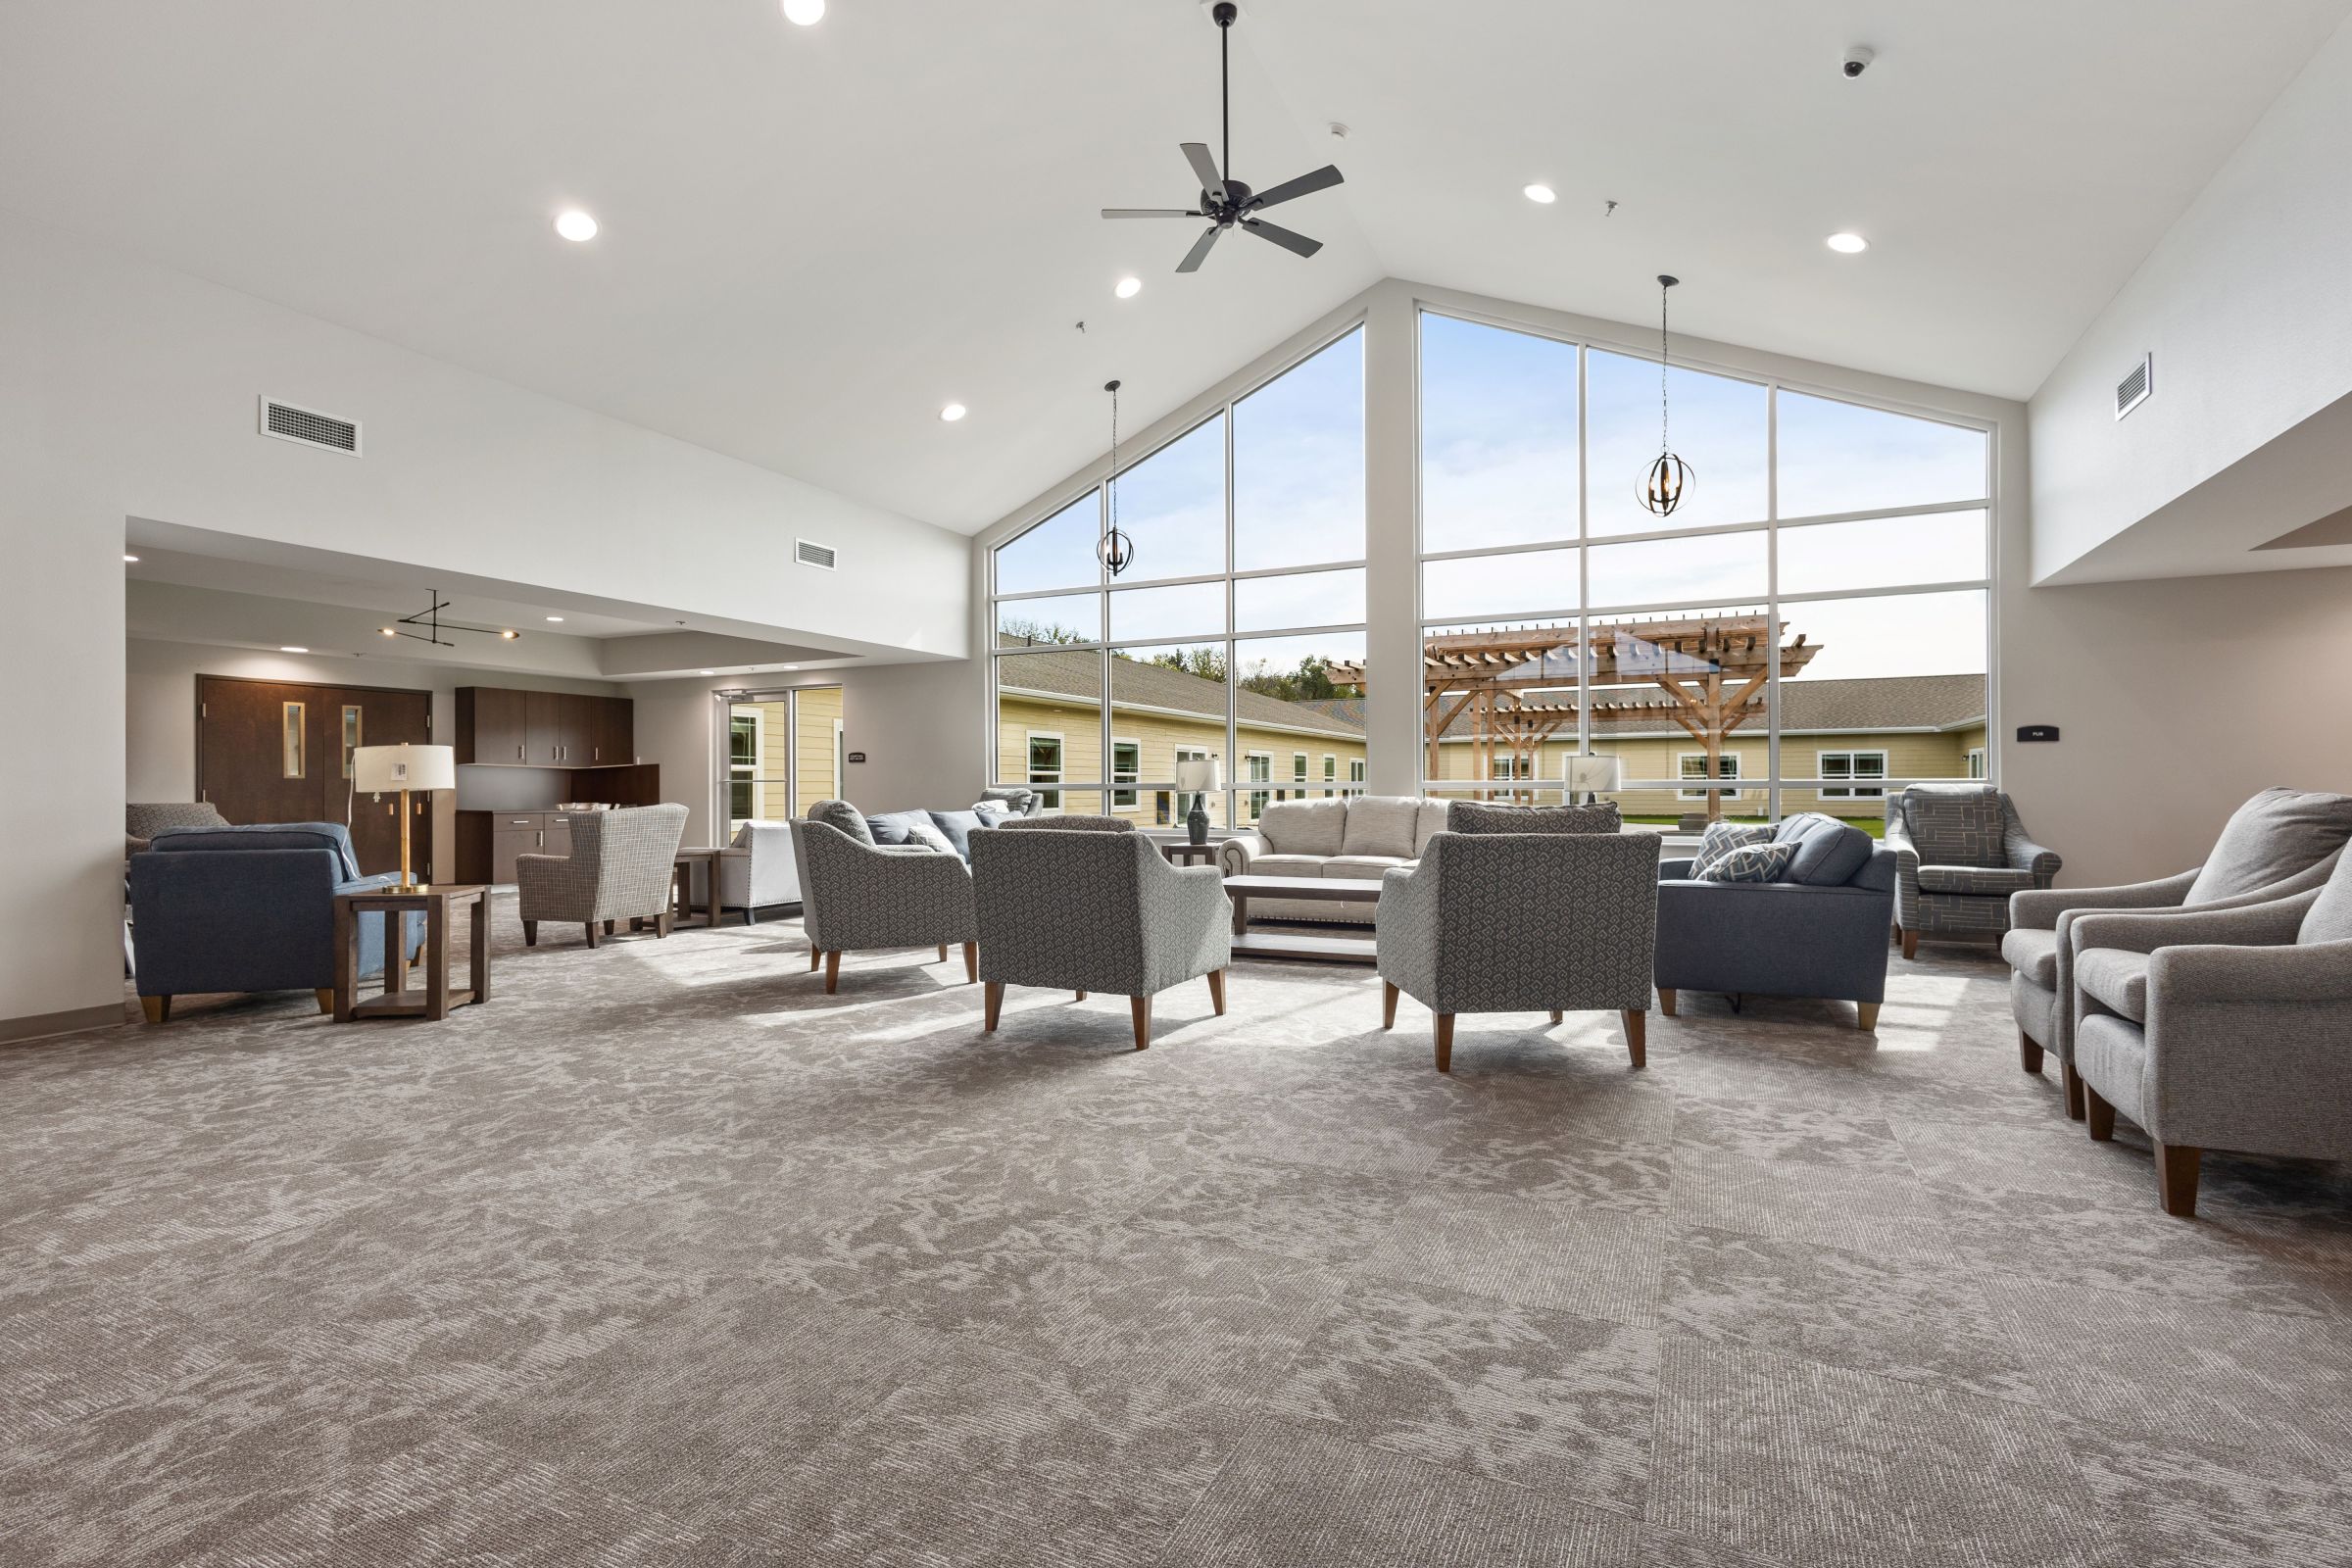 Peaceful Pines Senior Living Opens in Madison With the Help of the REED Fund Main Photo